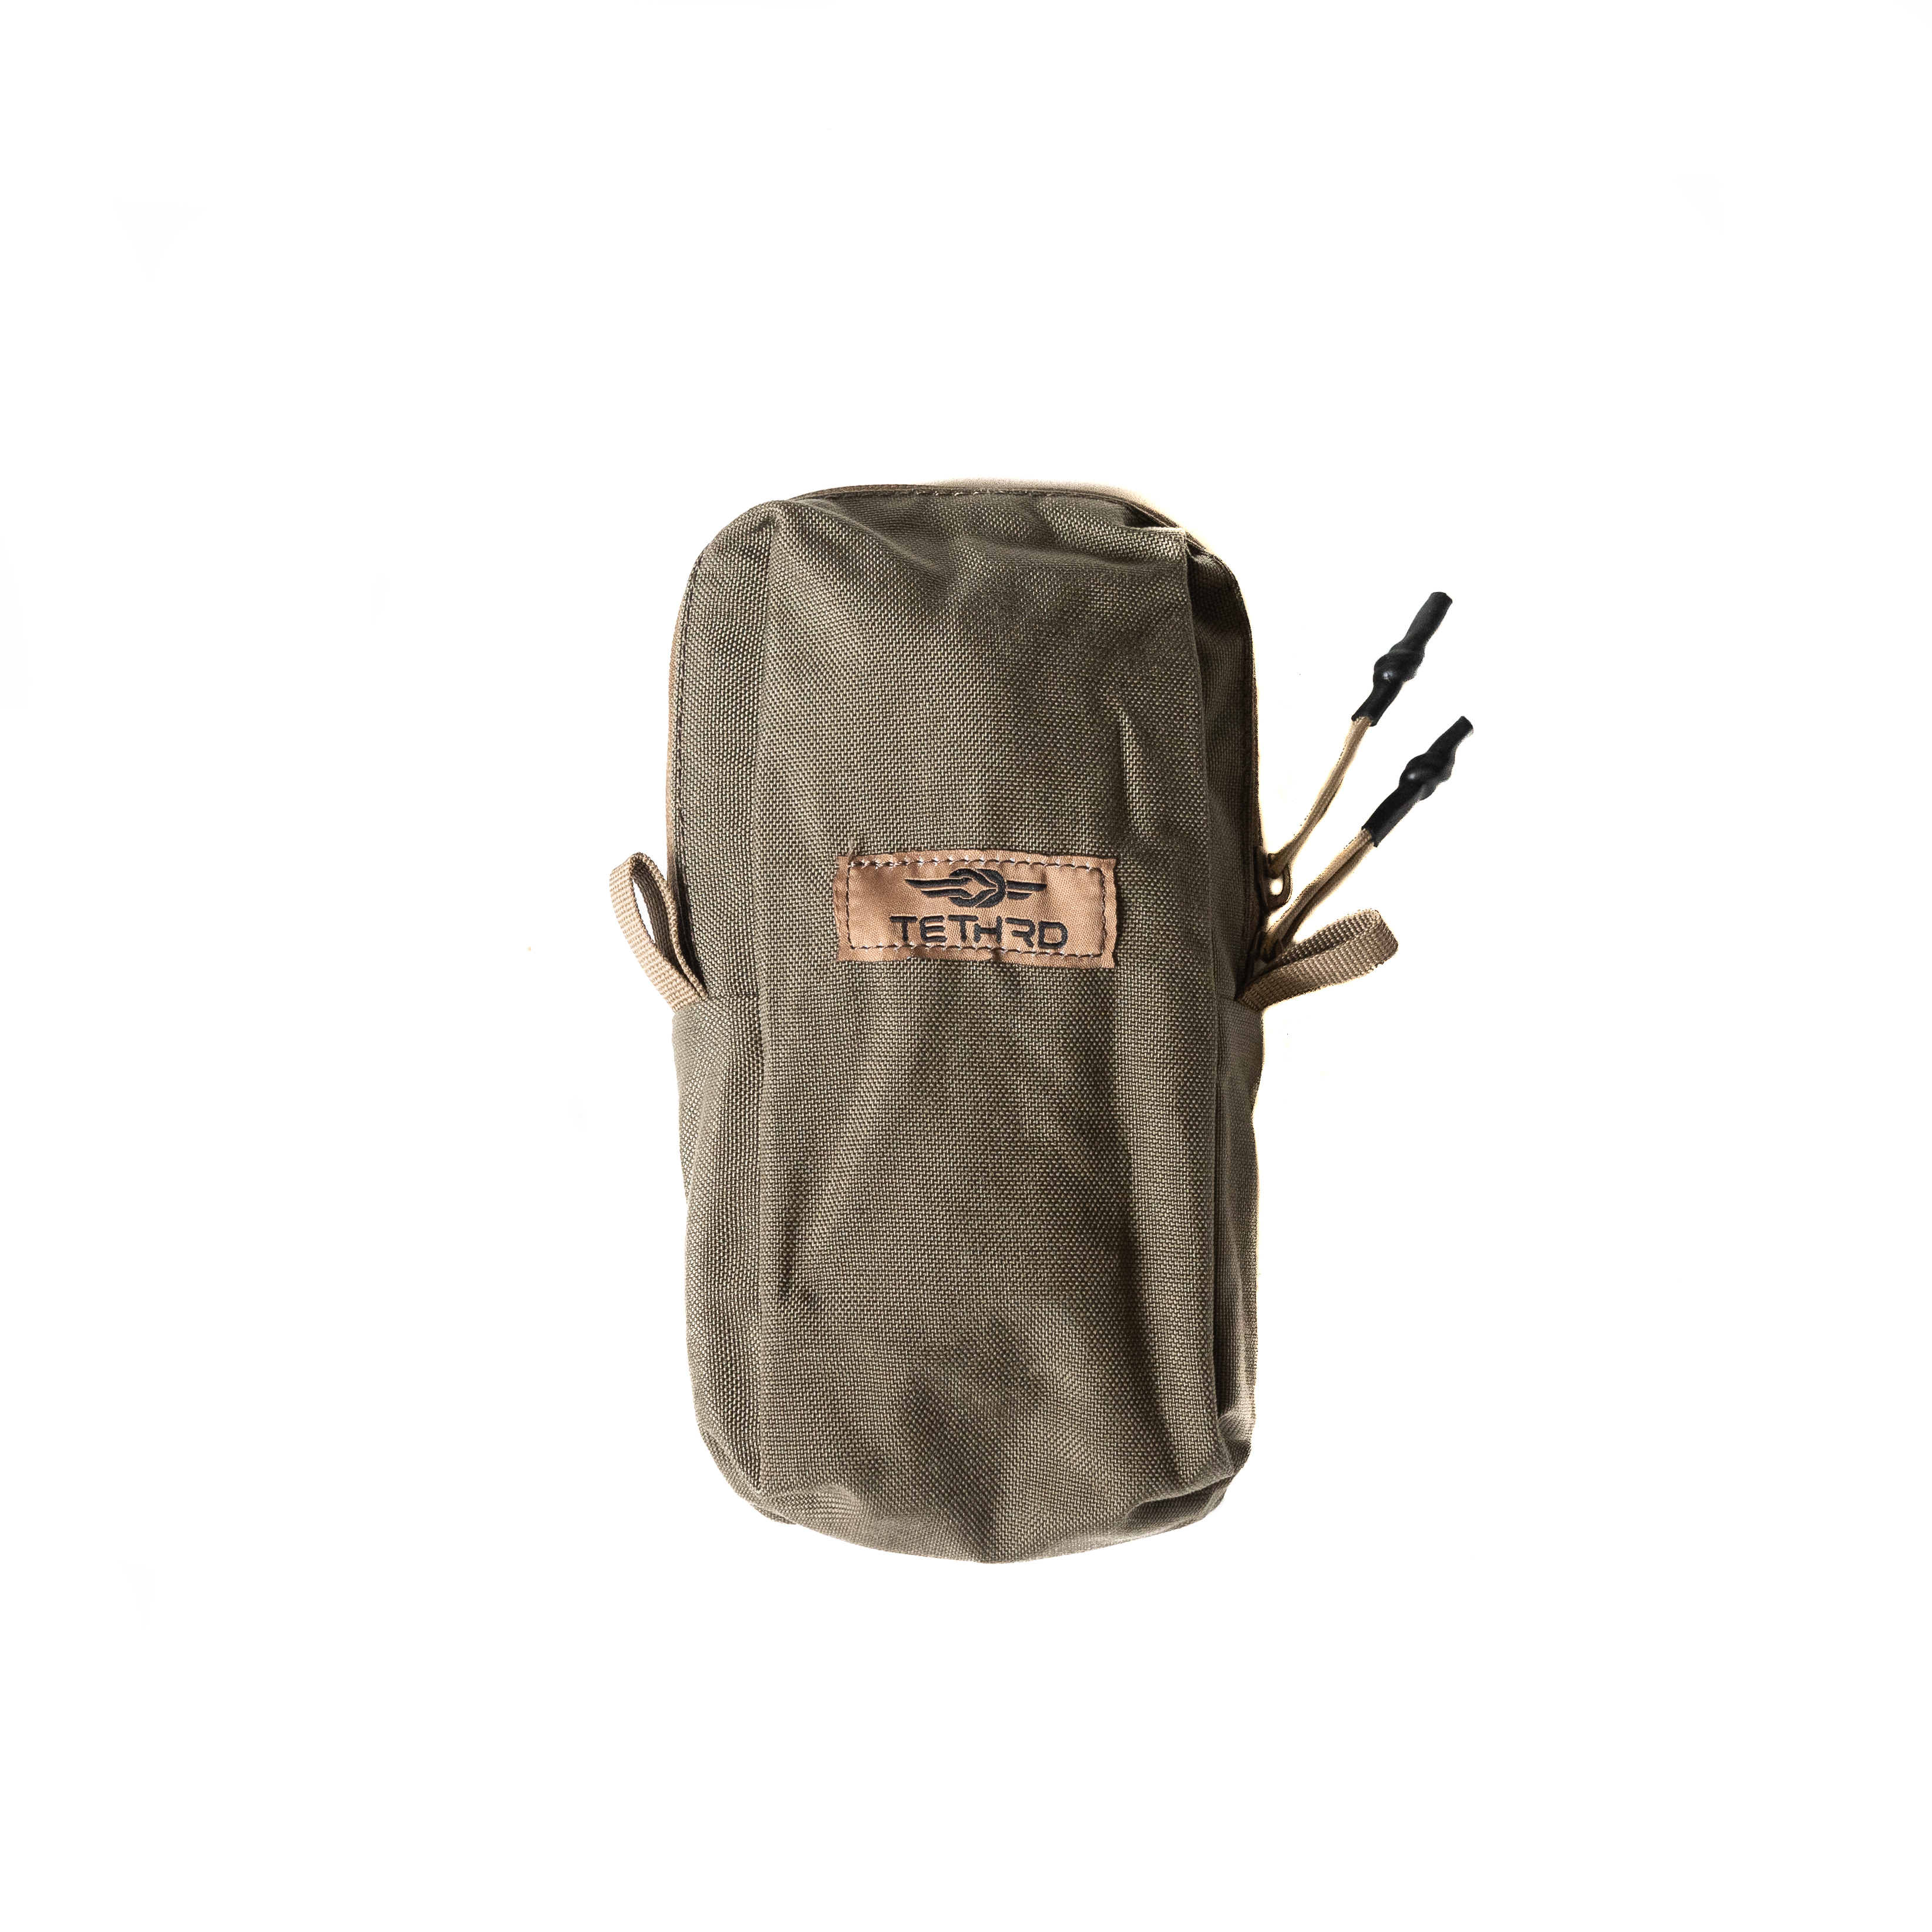 Molle Pouch - Tethrd